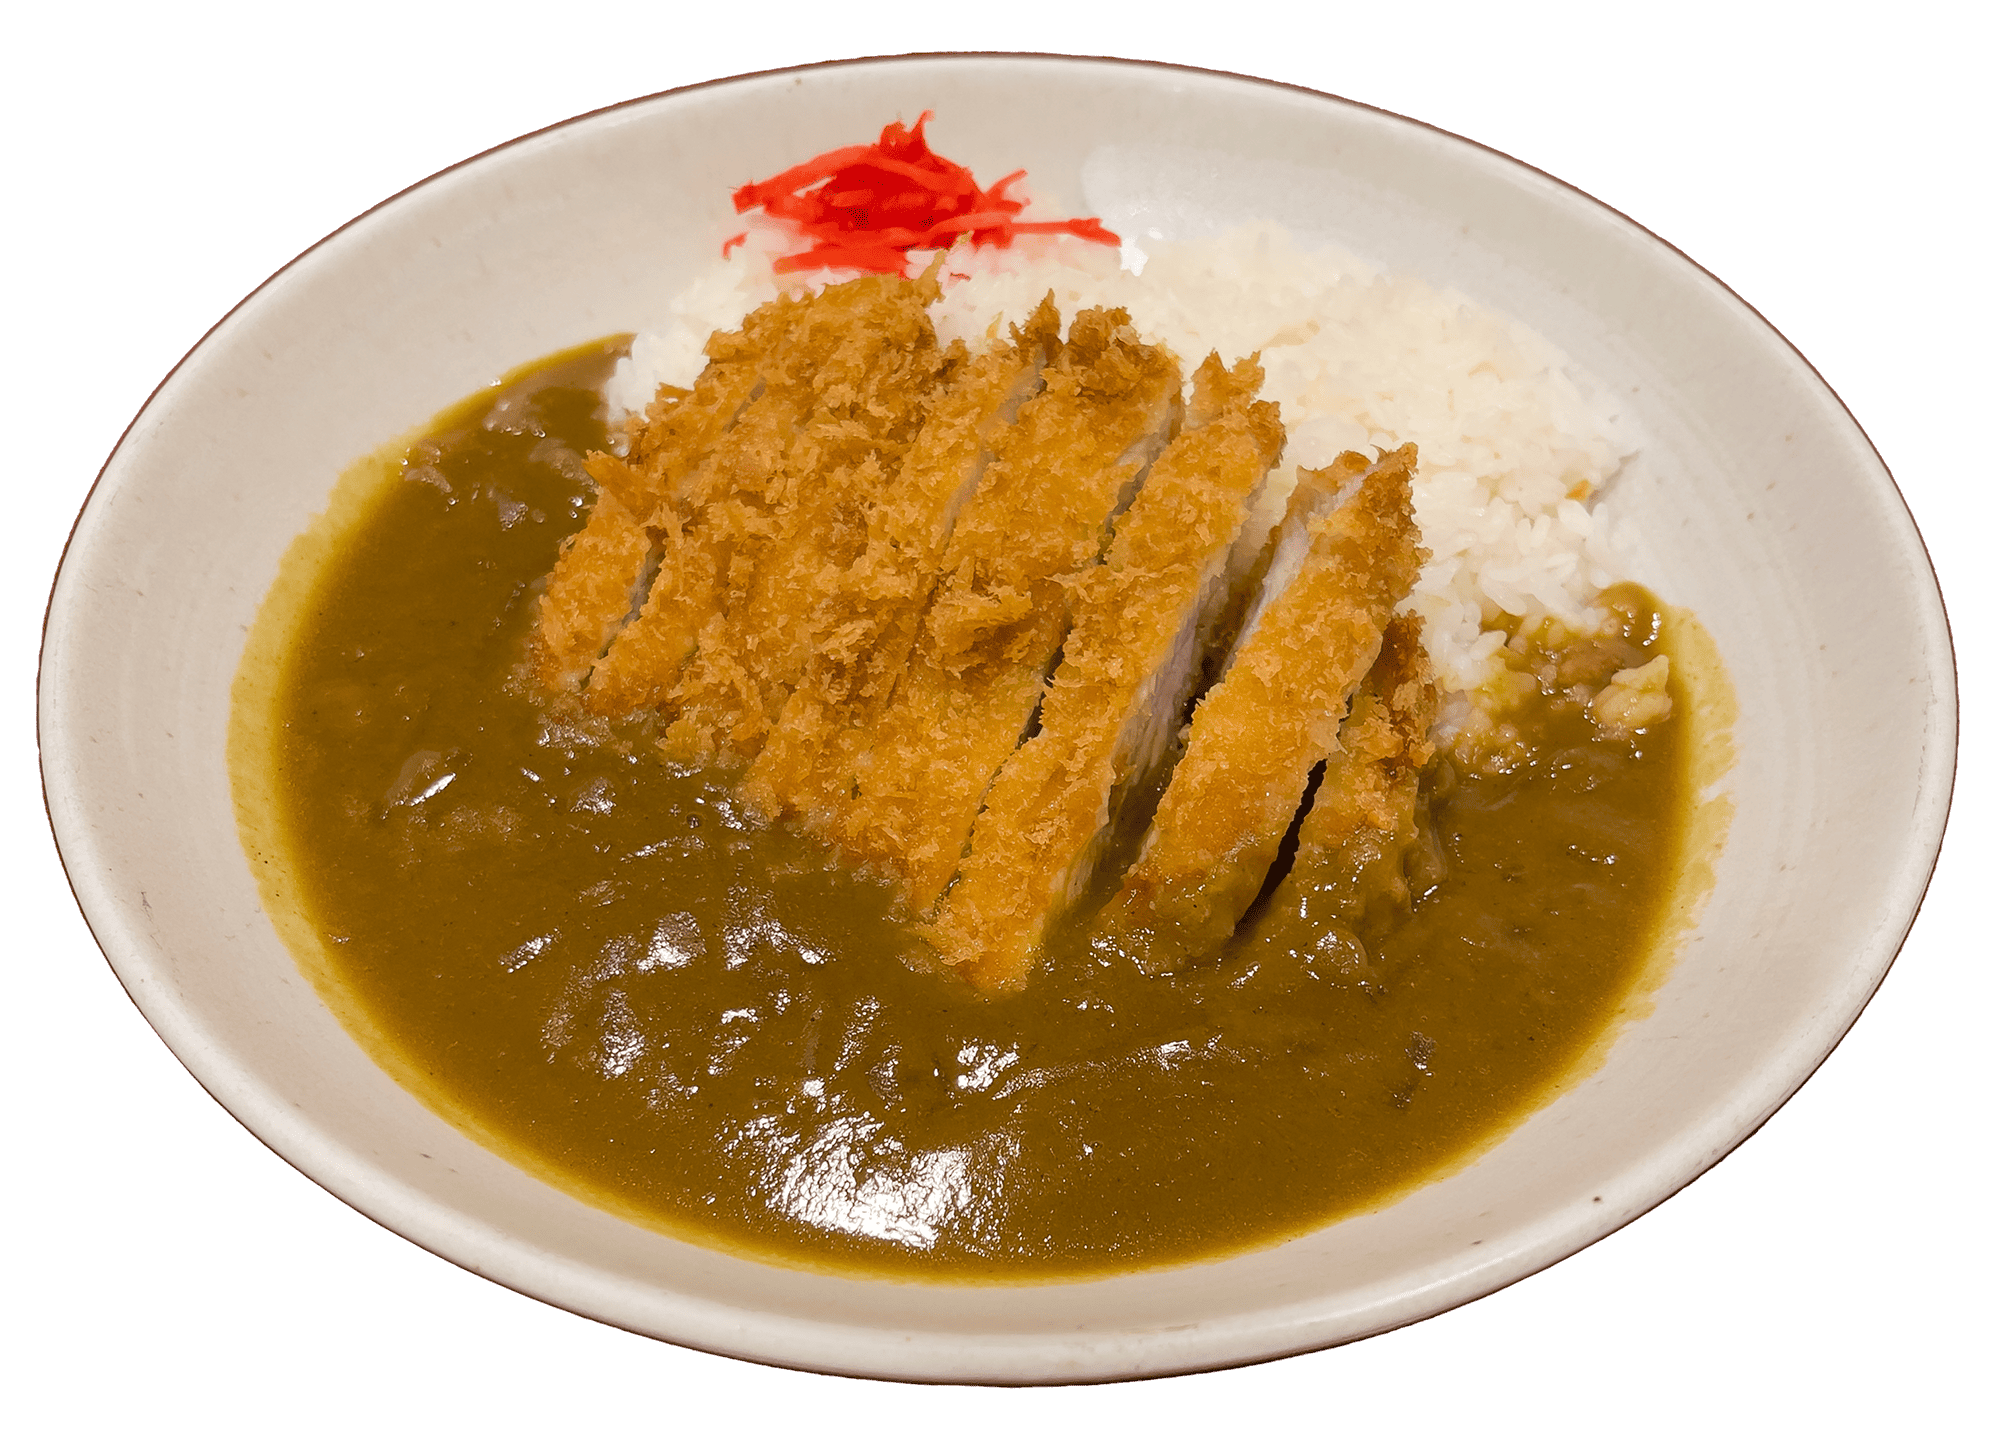 House special curry rice with deep fried chicken katsu